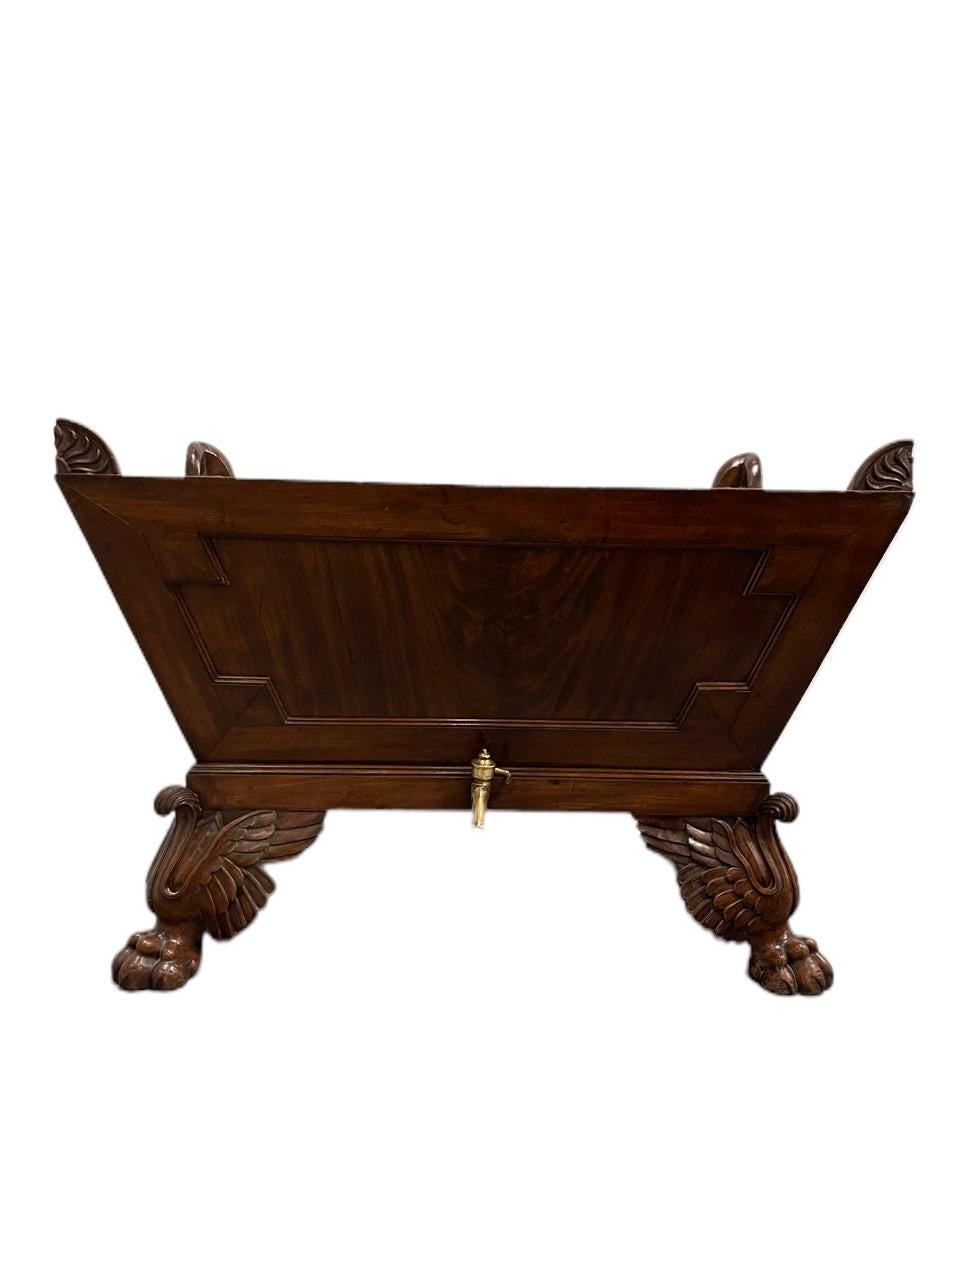 19th Century William IV Mahogany Jardiniere/Cellarette of sarcophagus form, each corner mounted with an anthemion carving, the case with figured panels, the interior with a tole liner, the base fitted with a metal drain spigot, and raised on